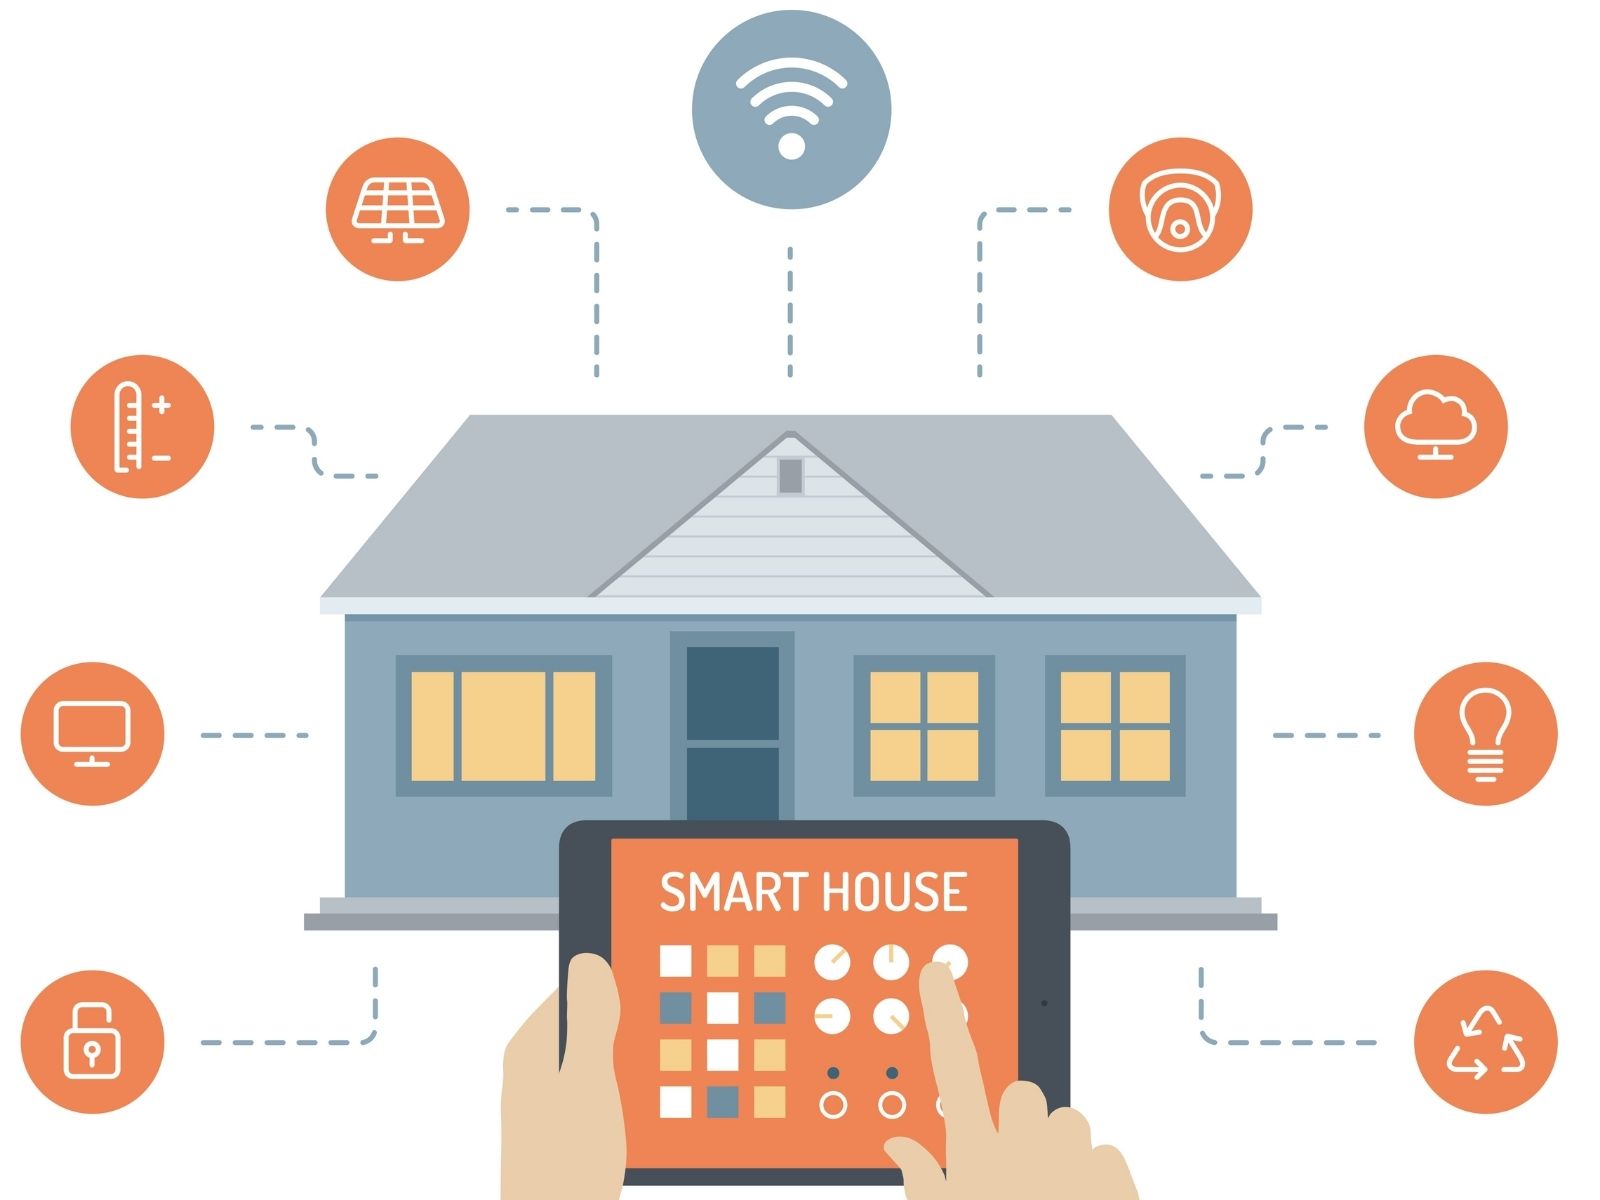 What Are The Benefits Of Having A Smart Home